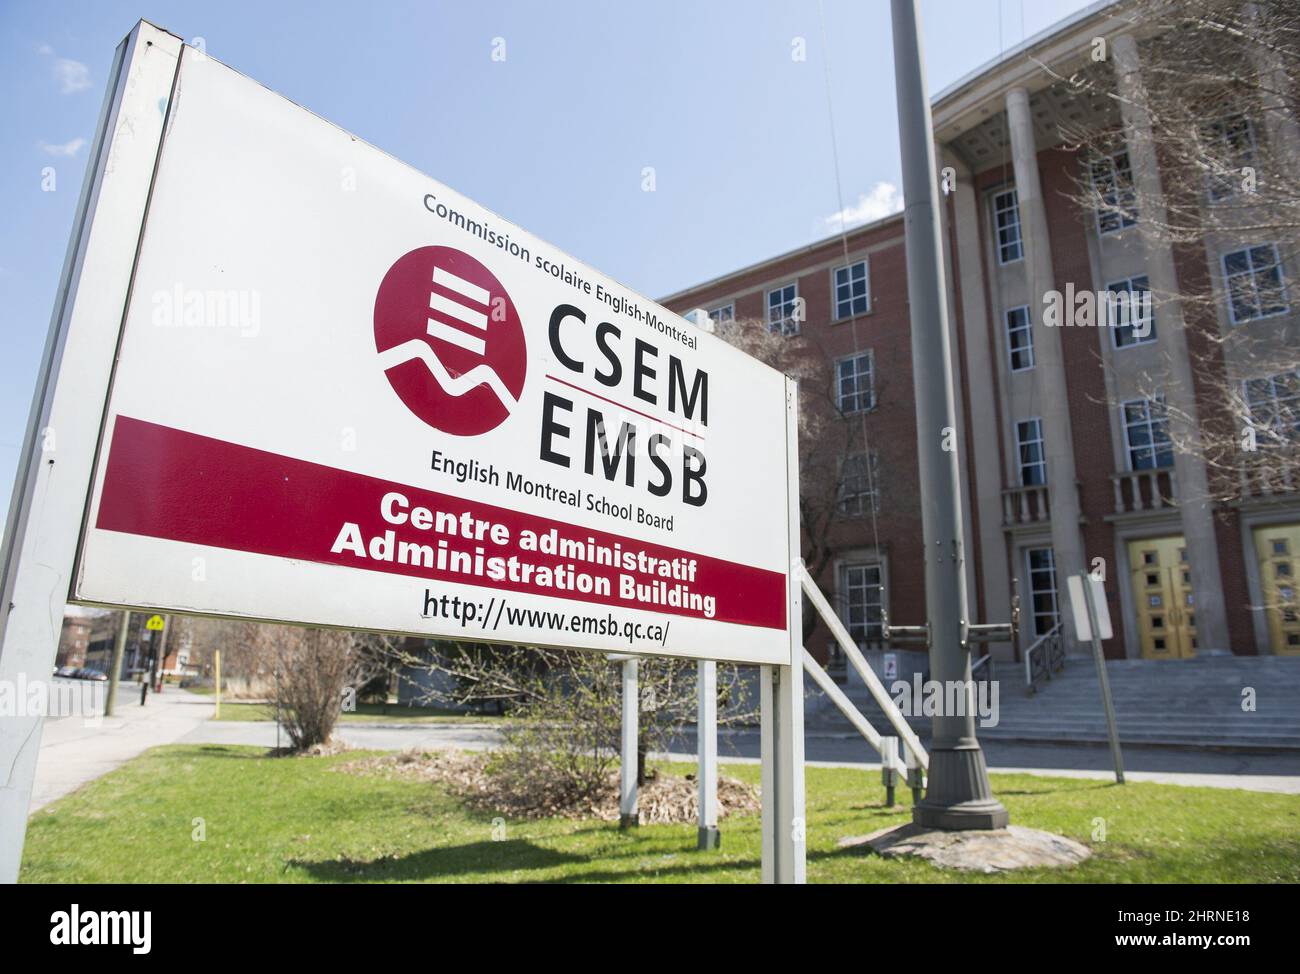 A sign for the English Montreal School Board (EMSB) is shown at its administration building in Montreal, Sunday, May 3, 2020, as the COVID-19 pandemic continues in Canada and around the world. The school board said it would determine the date when it would reopen its schools even if the Government of Quebec deems it safe. THE CANADIAN PRESS/Graham Hughes Stock Photo